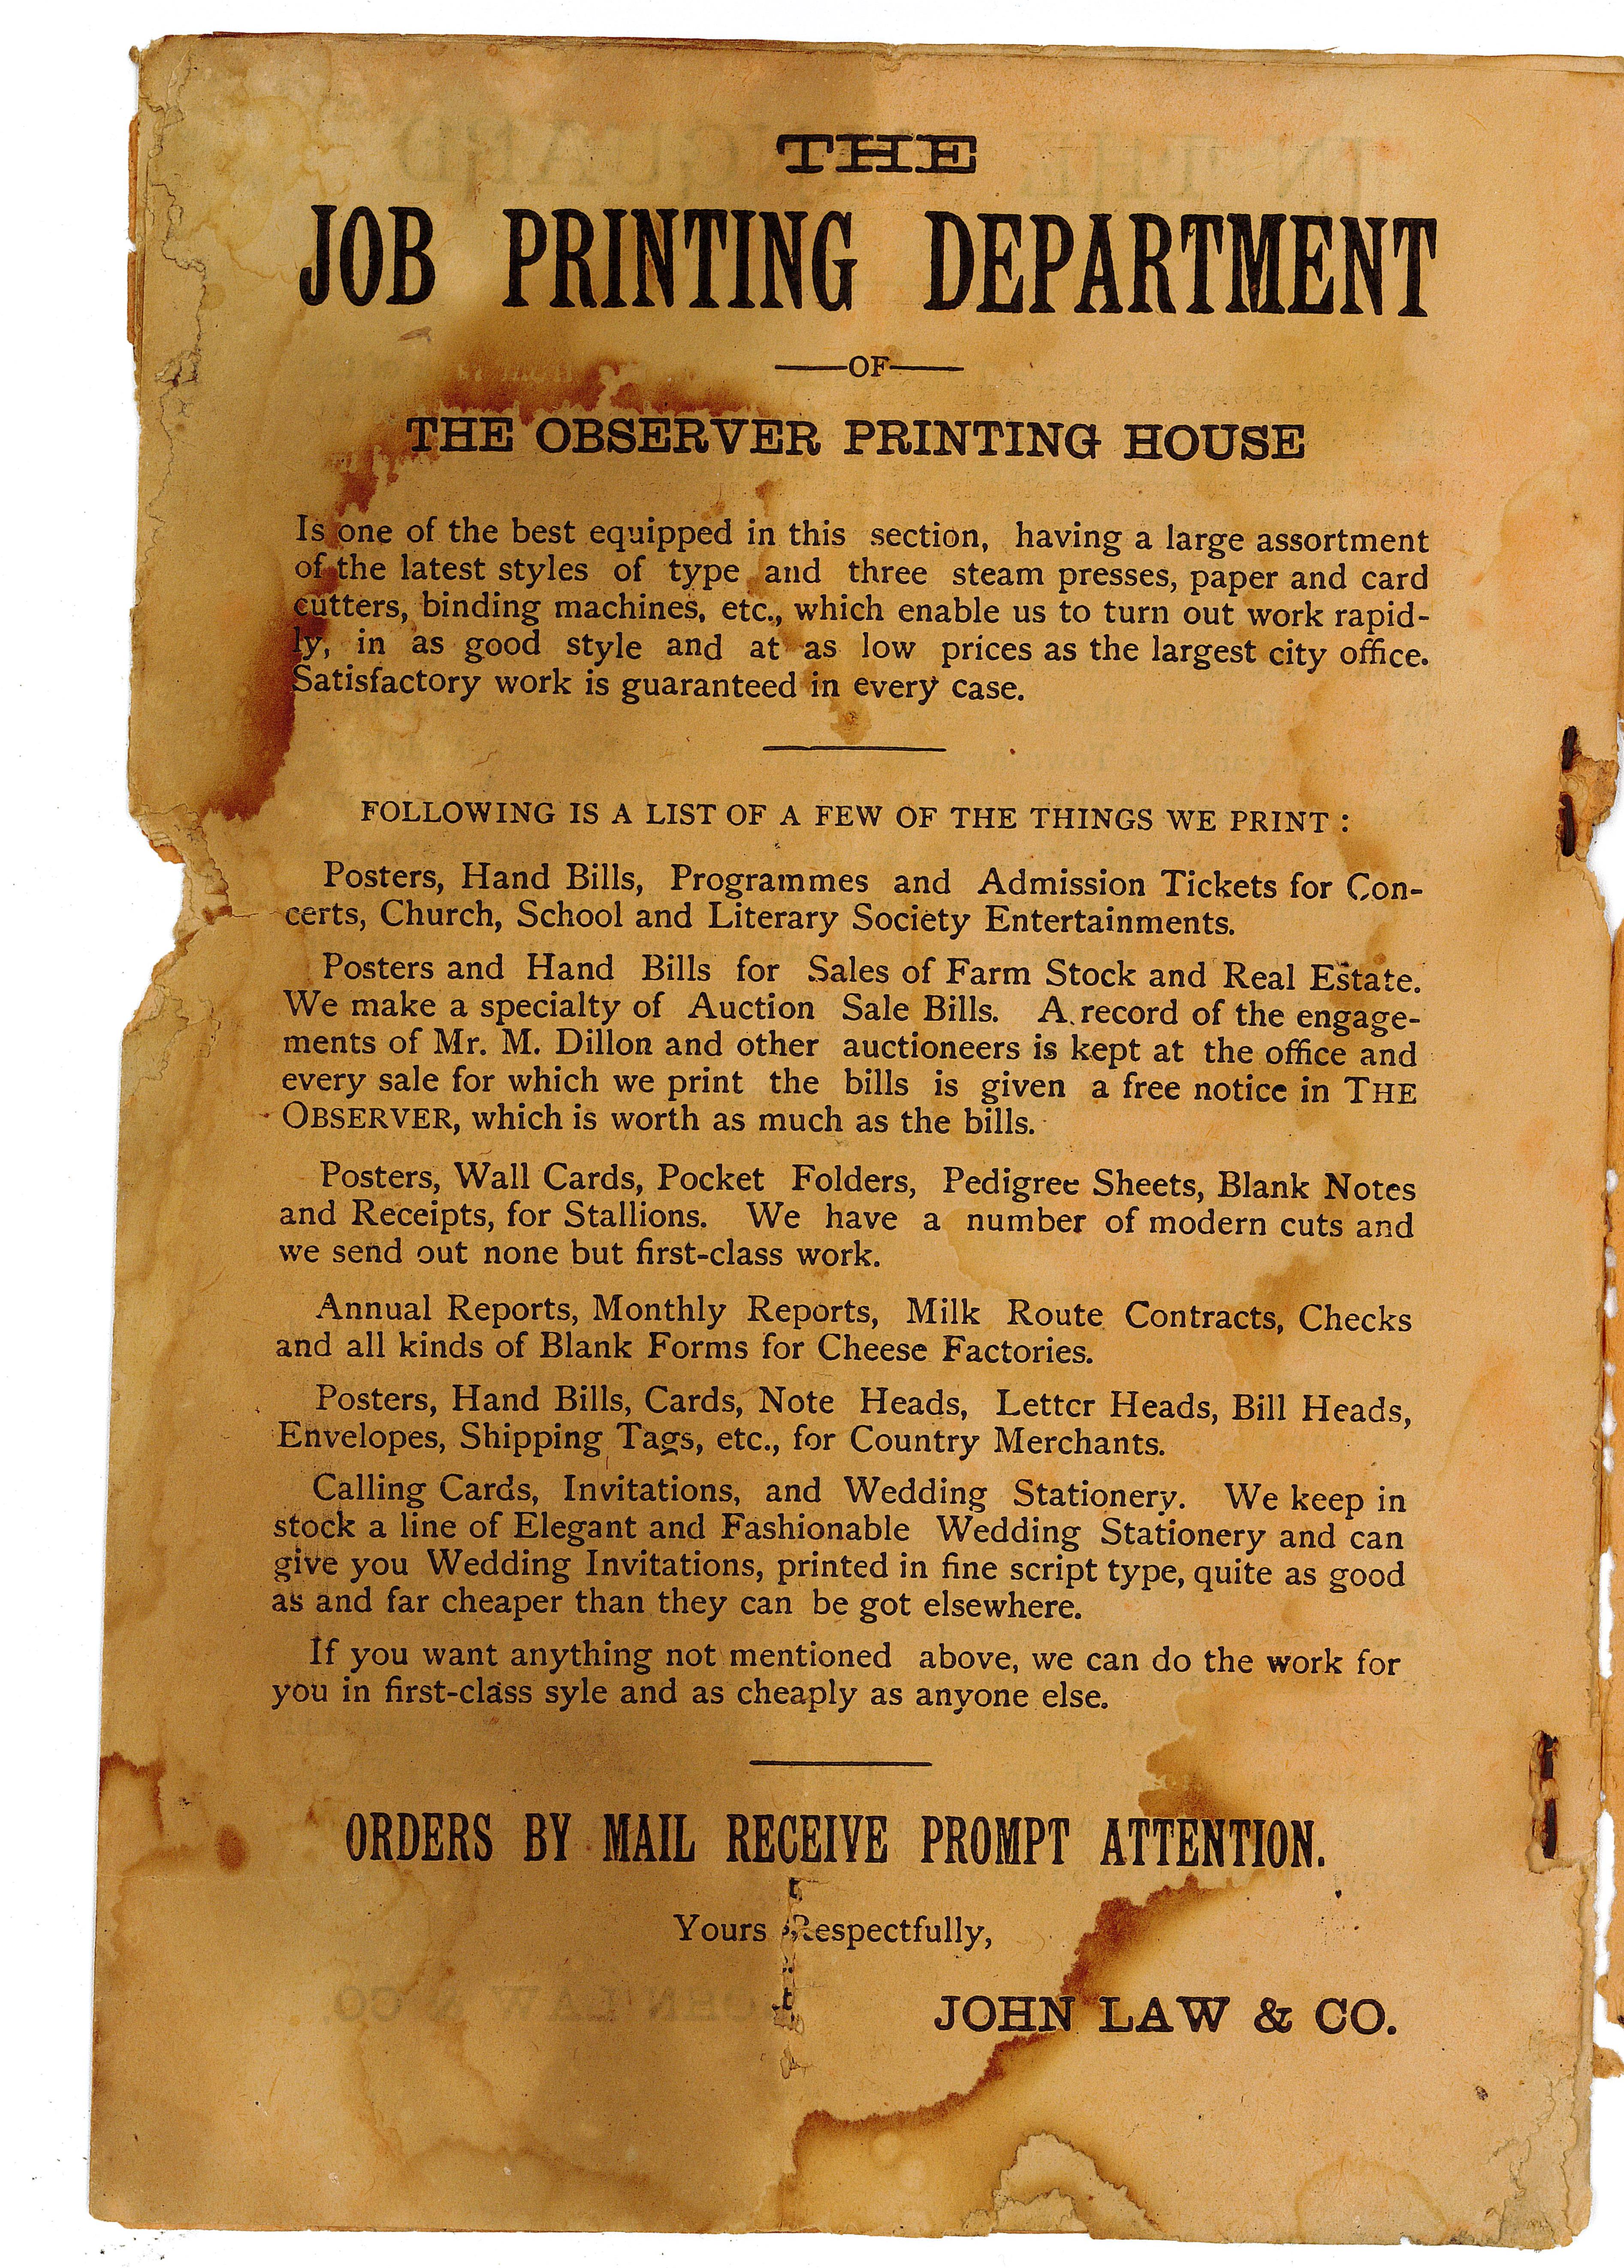 Advertisement printed on paper for the Observer Printing House. Paper is stained and worn. Lists the types of print materials they can produce.